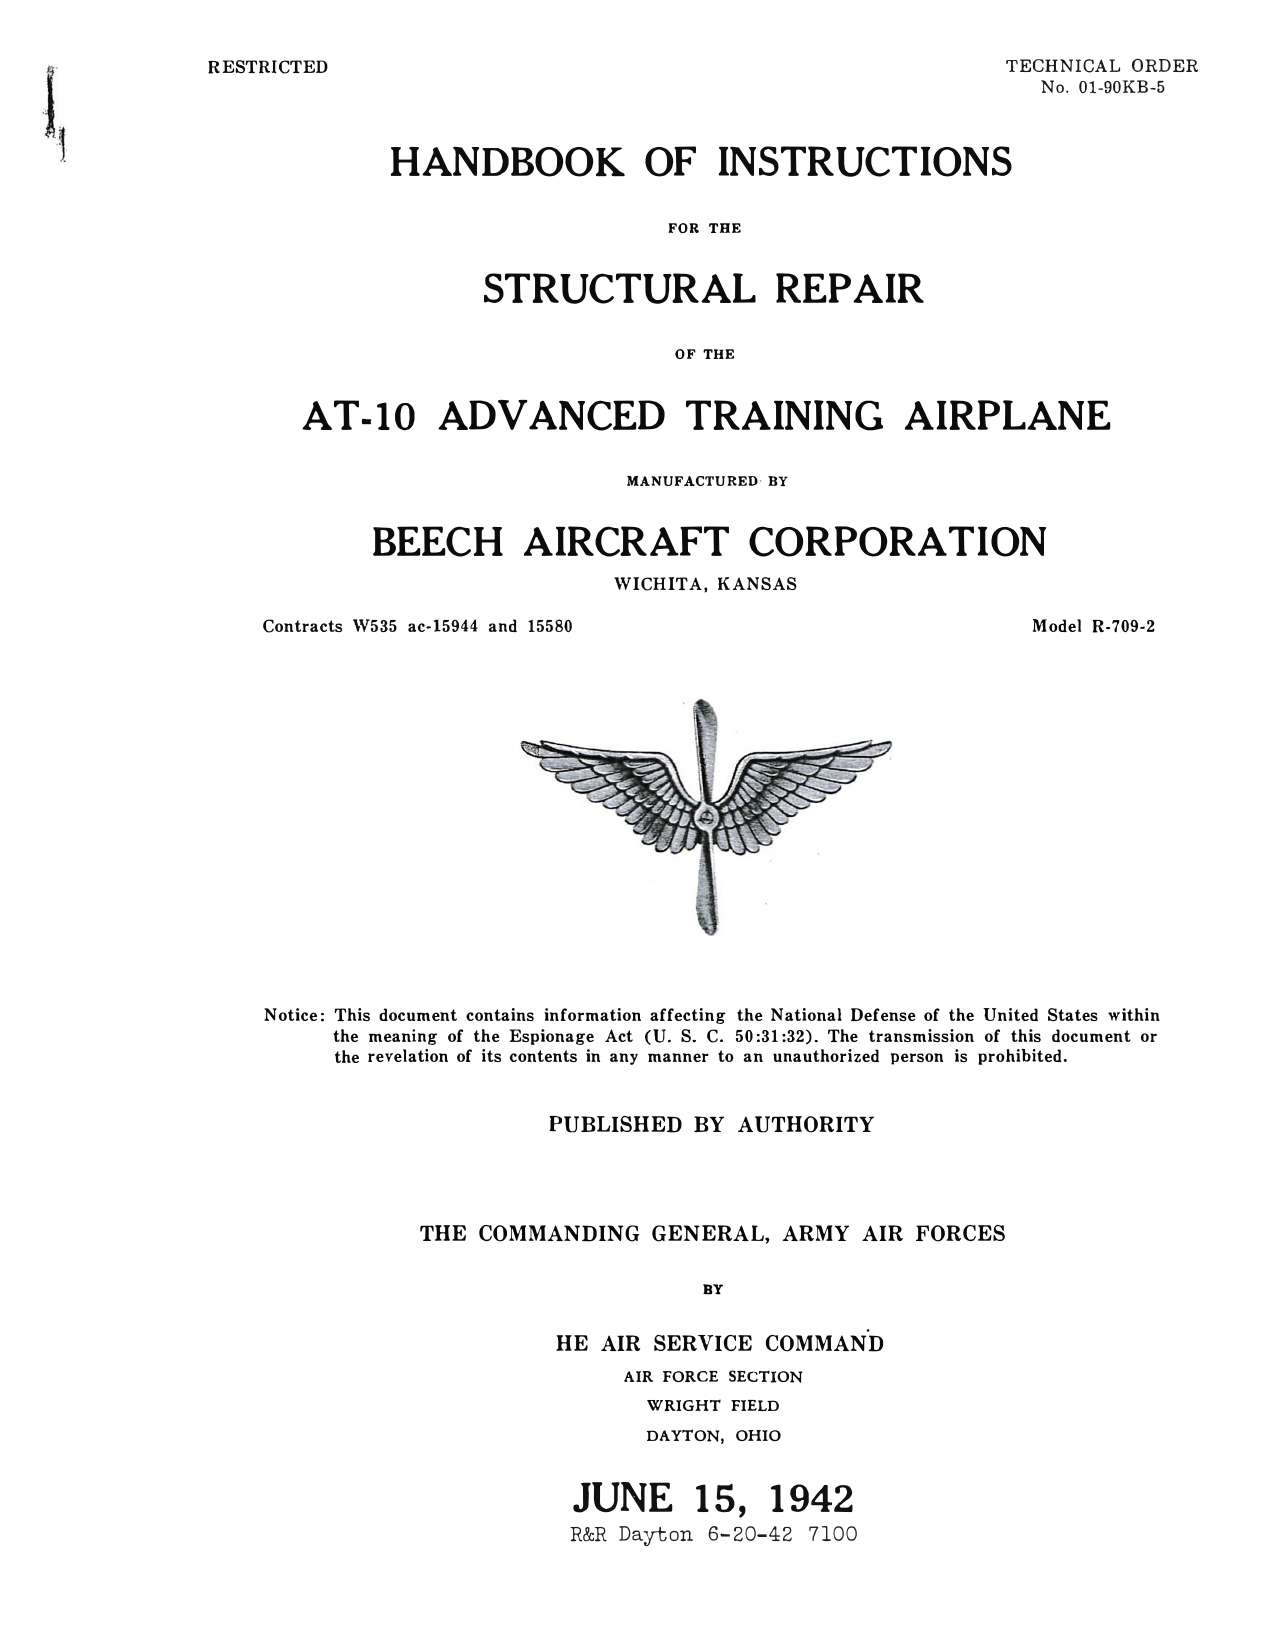 Sample page 1 from AirCorps Library document: Structural Repair Instructions - AT-10